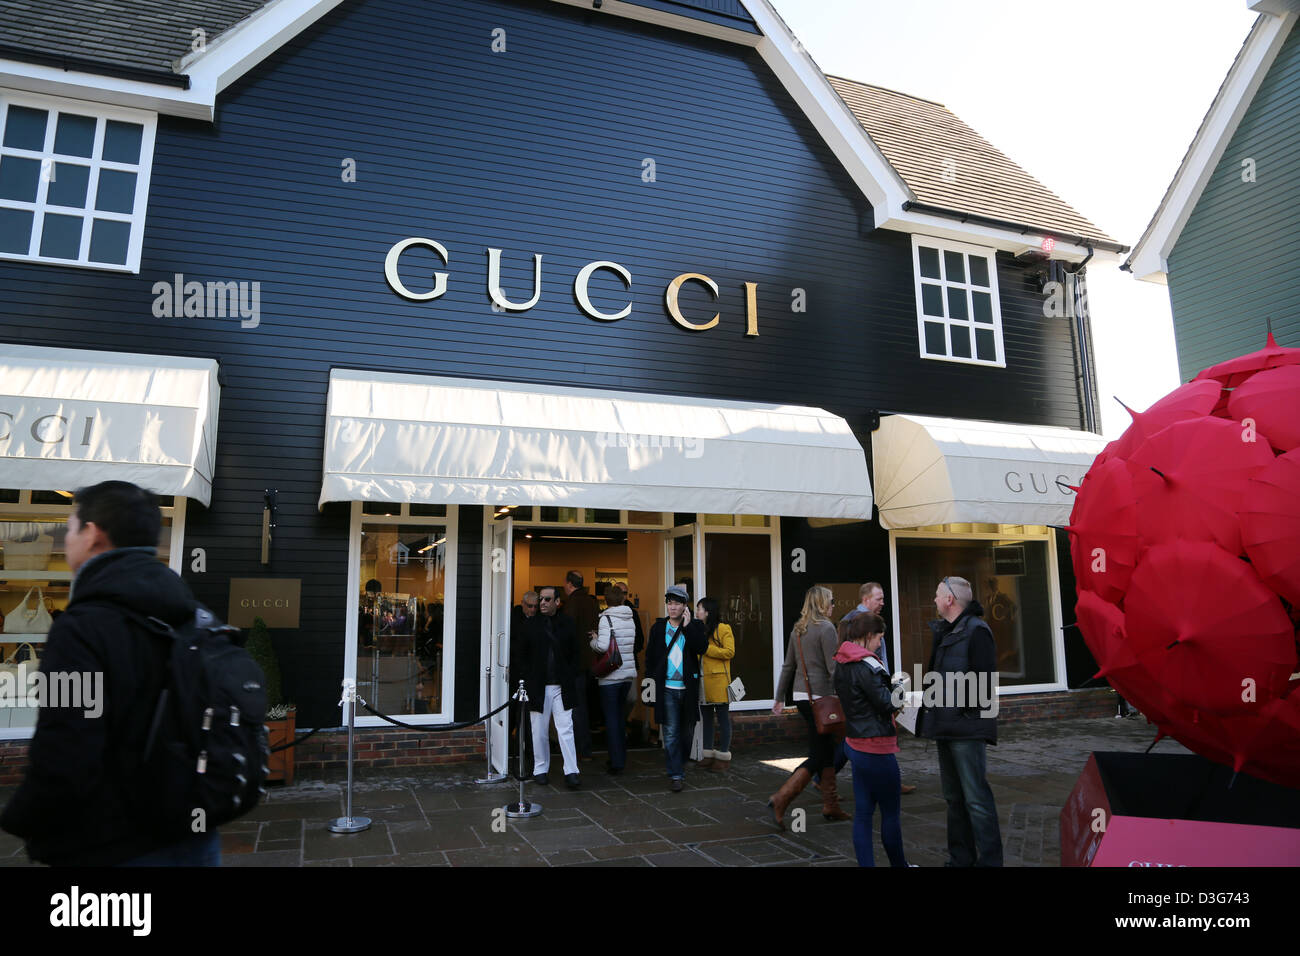 Shopping at Bicester Village outlet/ D&G/Christian Louboutin